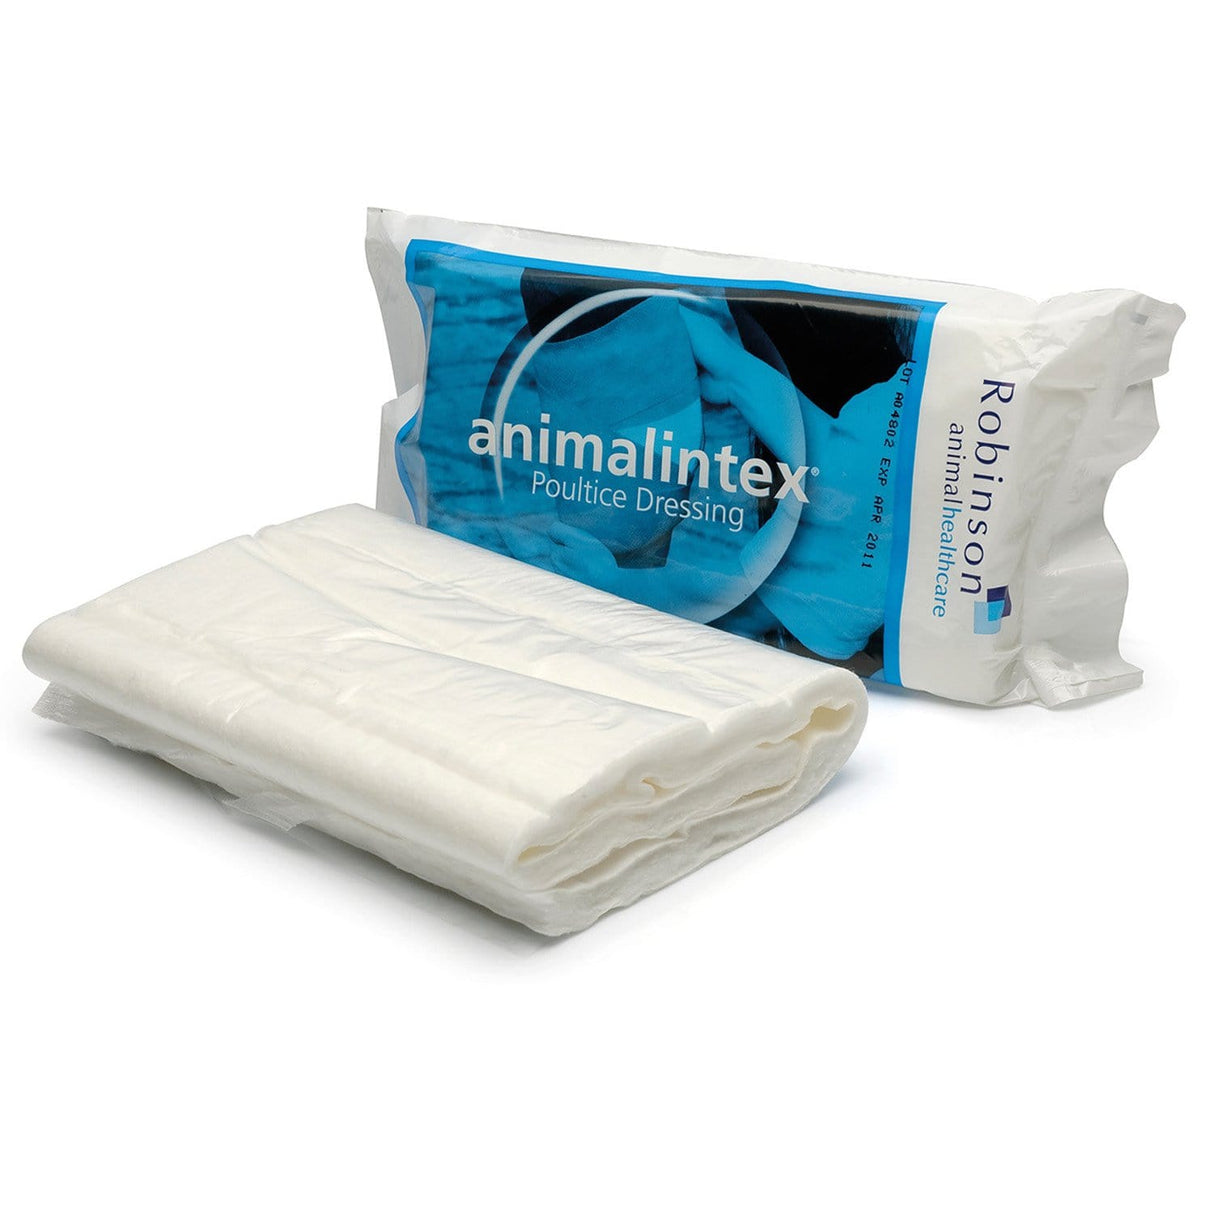 Robinsons Healthcare Animalintex Poultice Dressing x 10 Pack